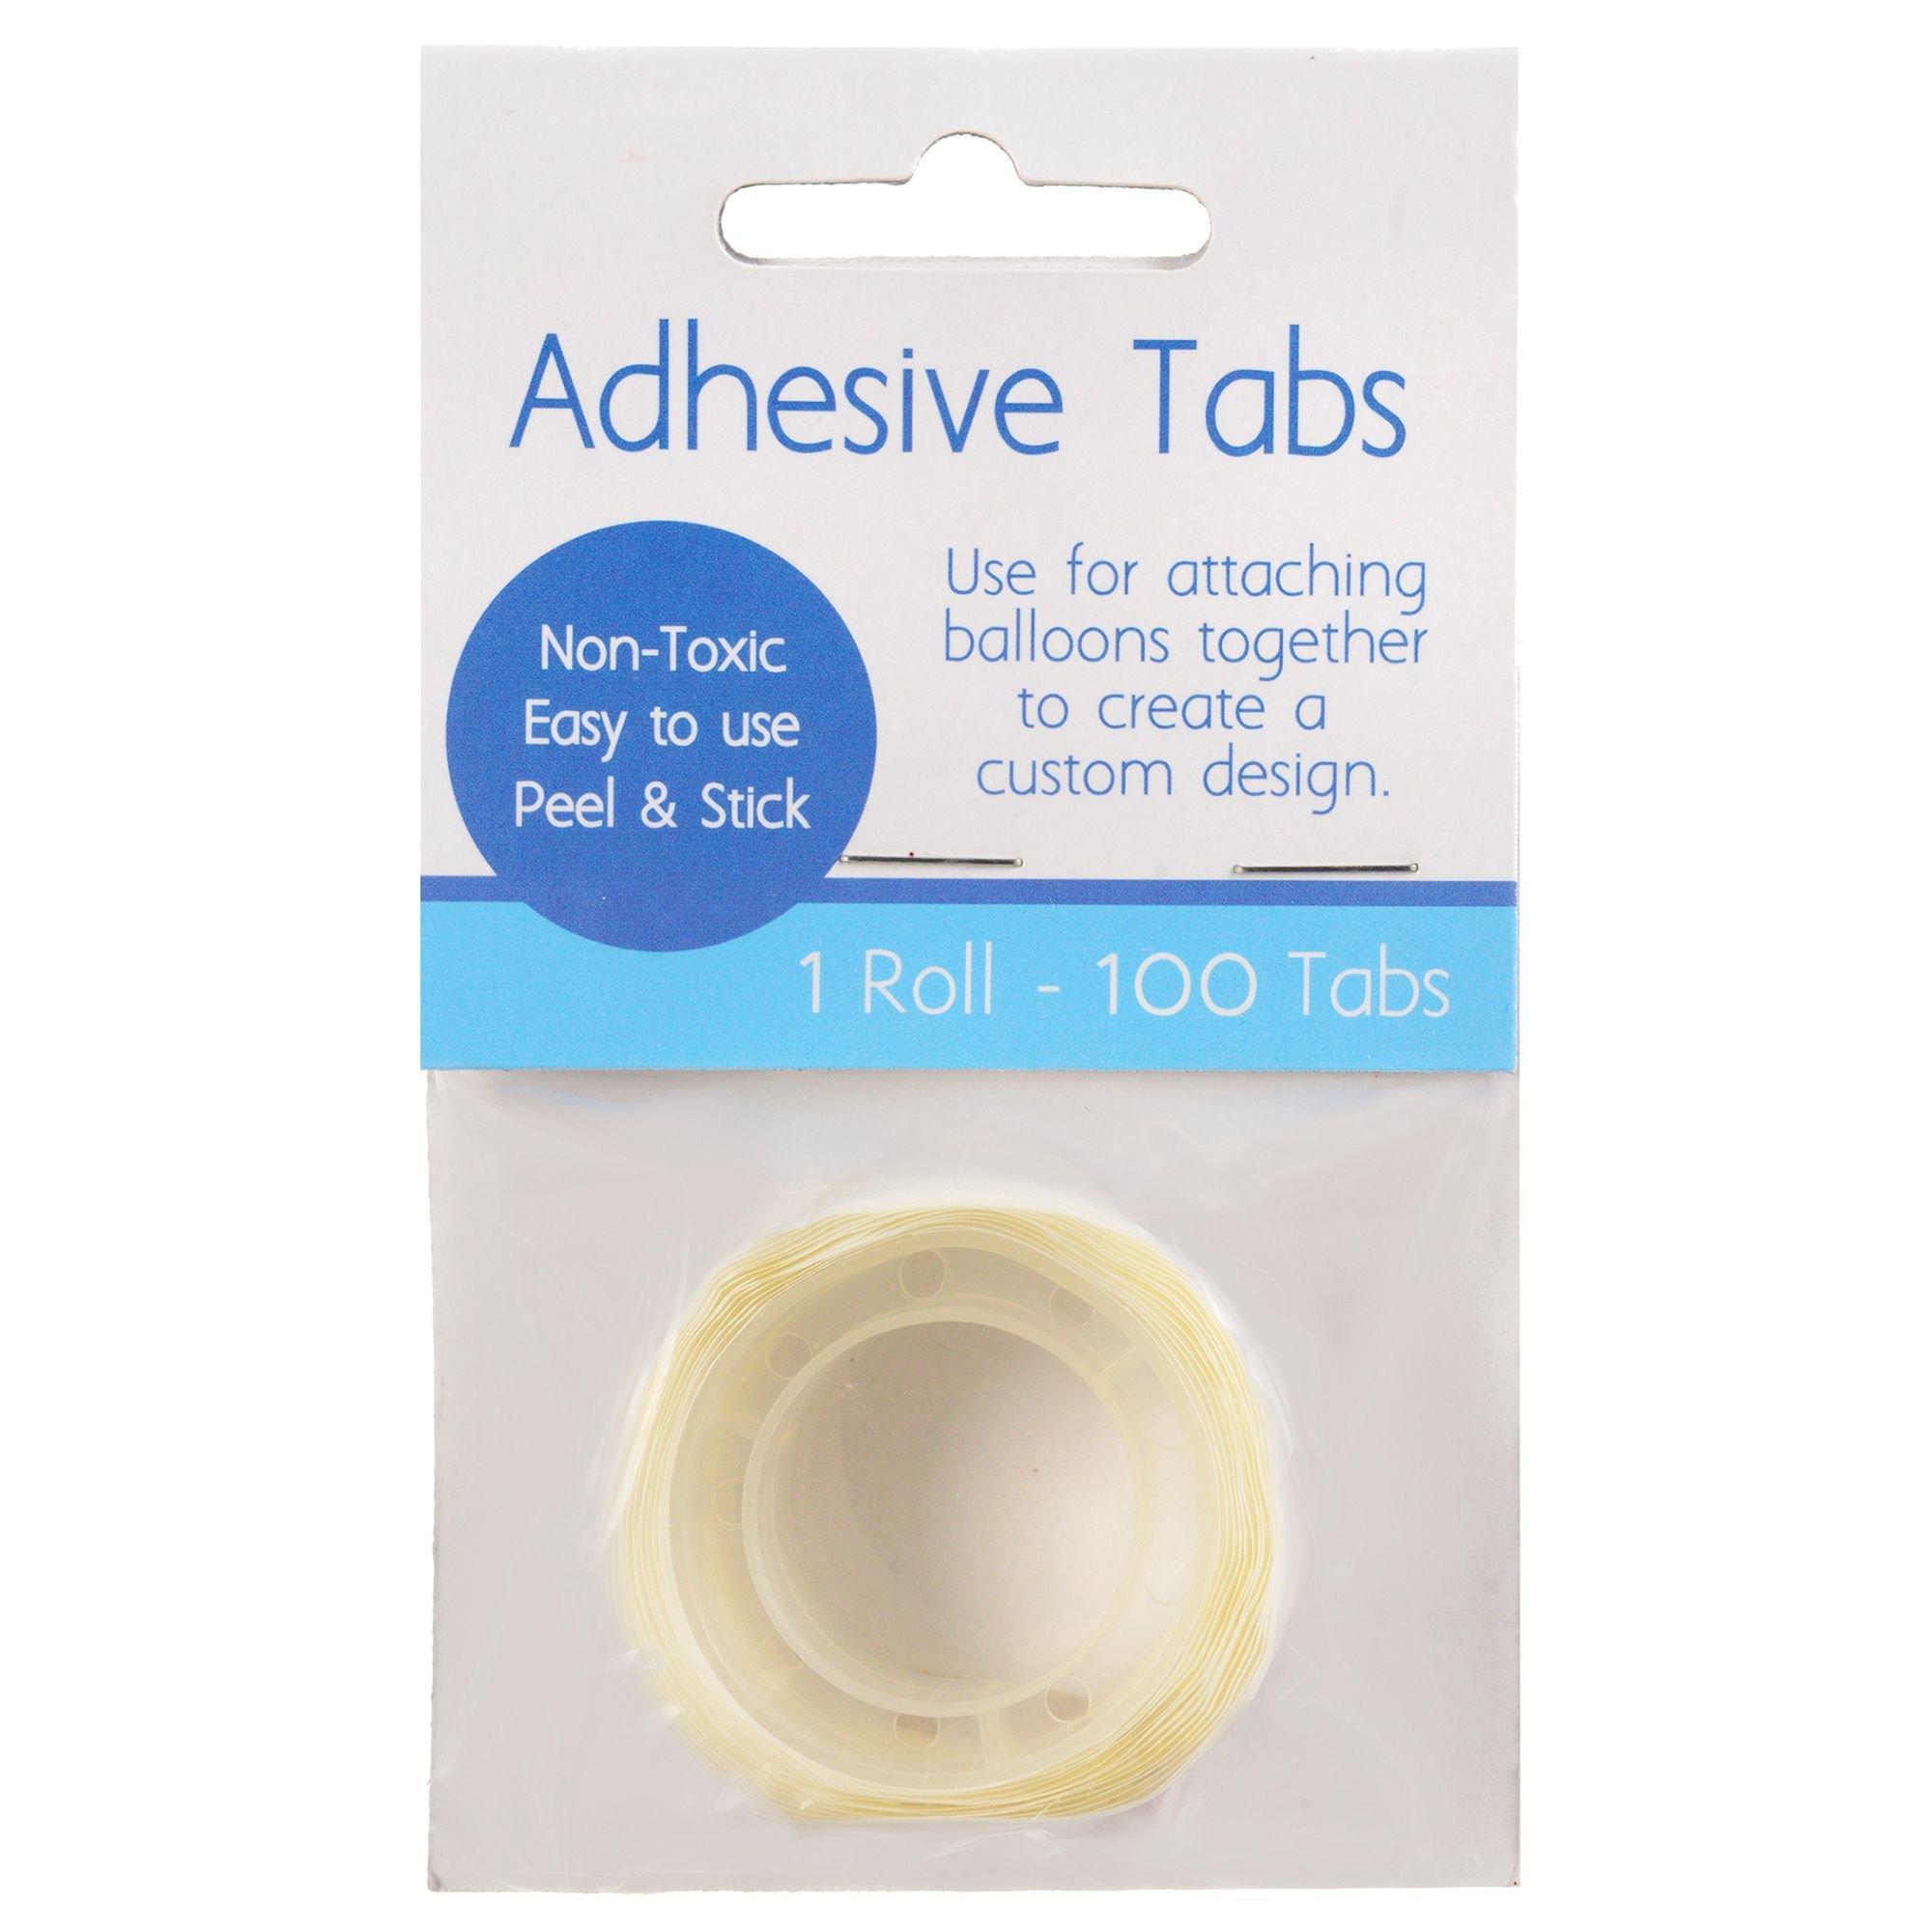 Shop Adhesive For Balloon online